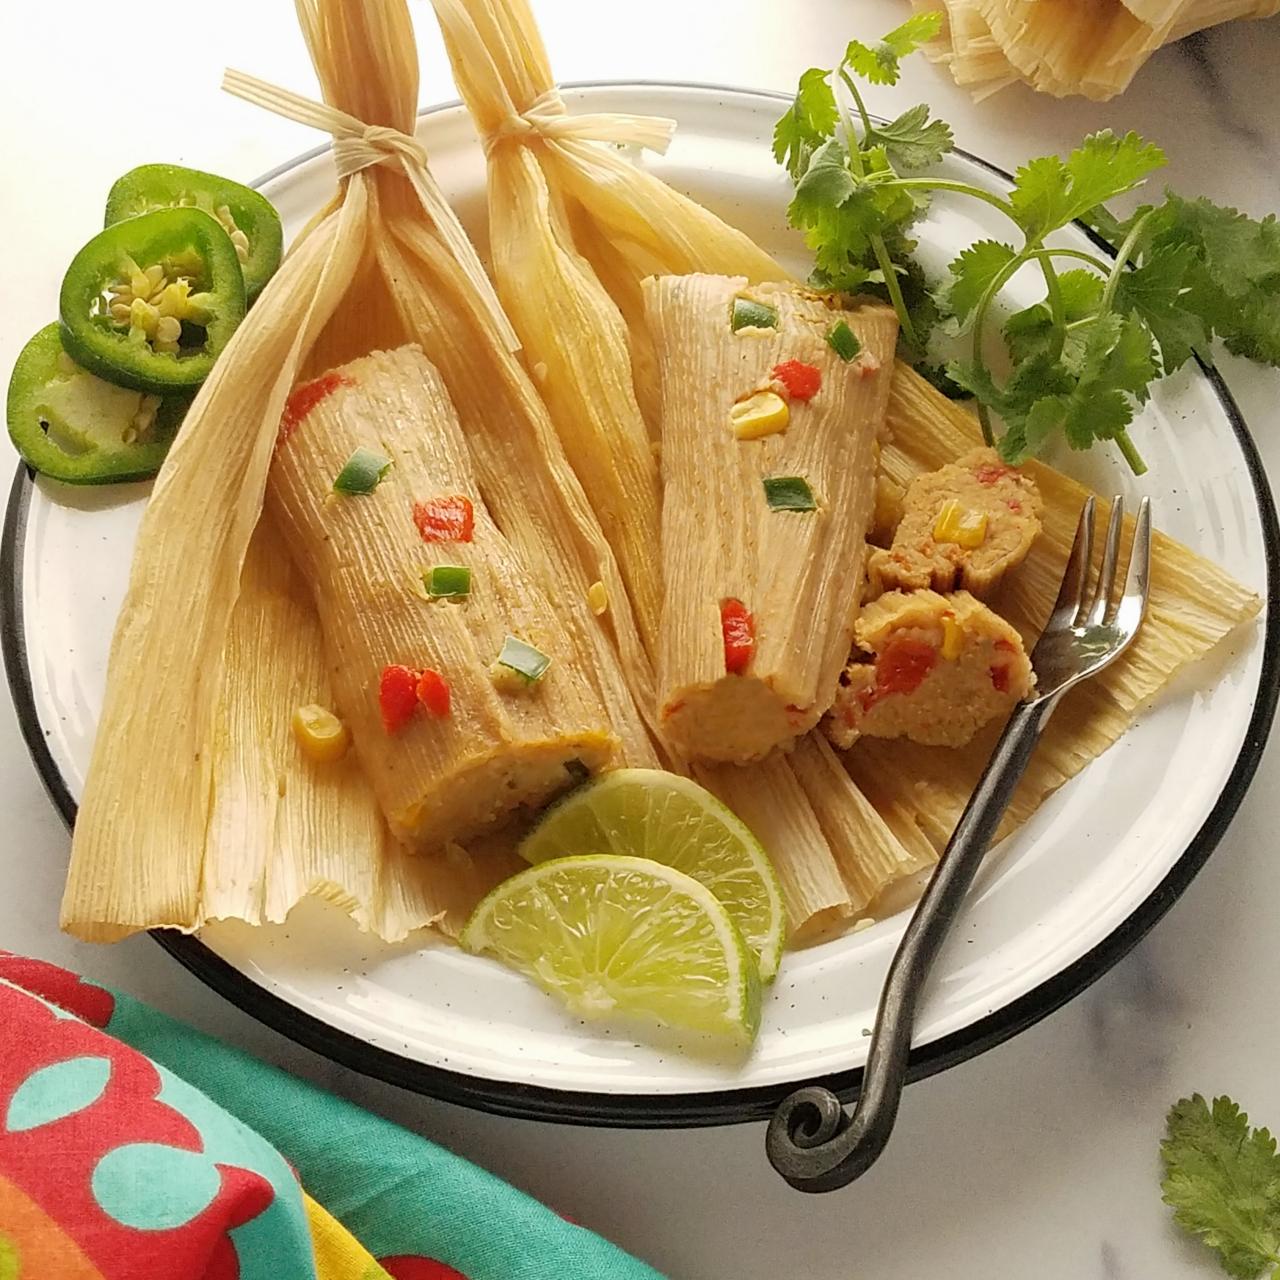 How To Make Tamales: A Beginner's Guide - Stater Bros. Markets